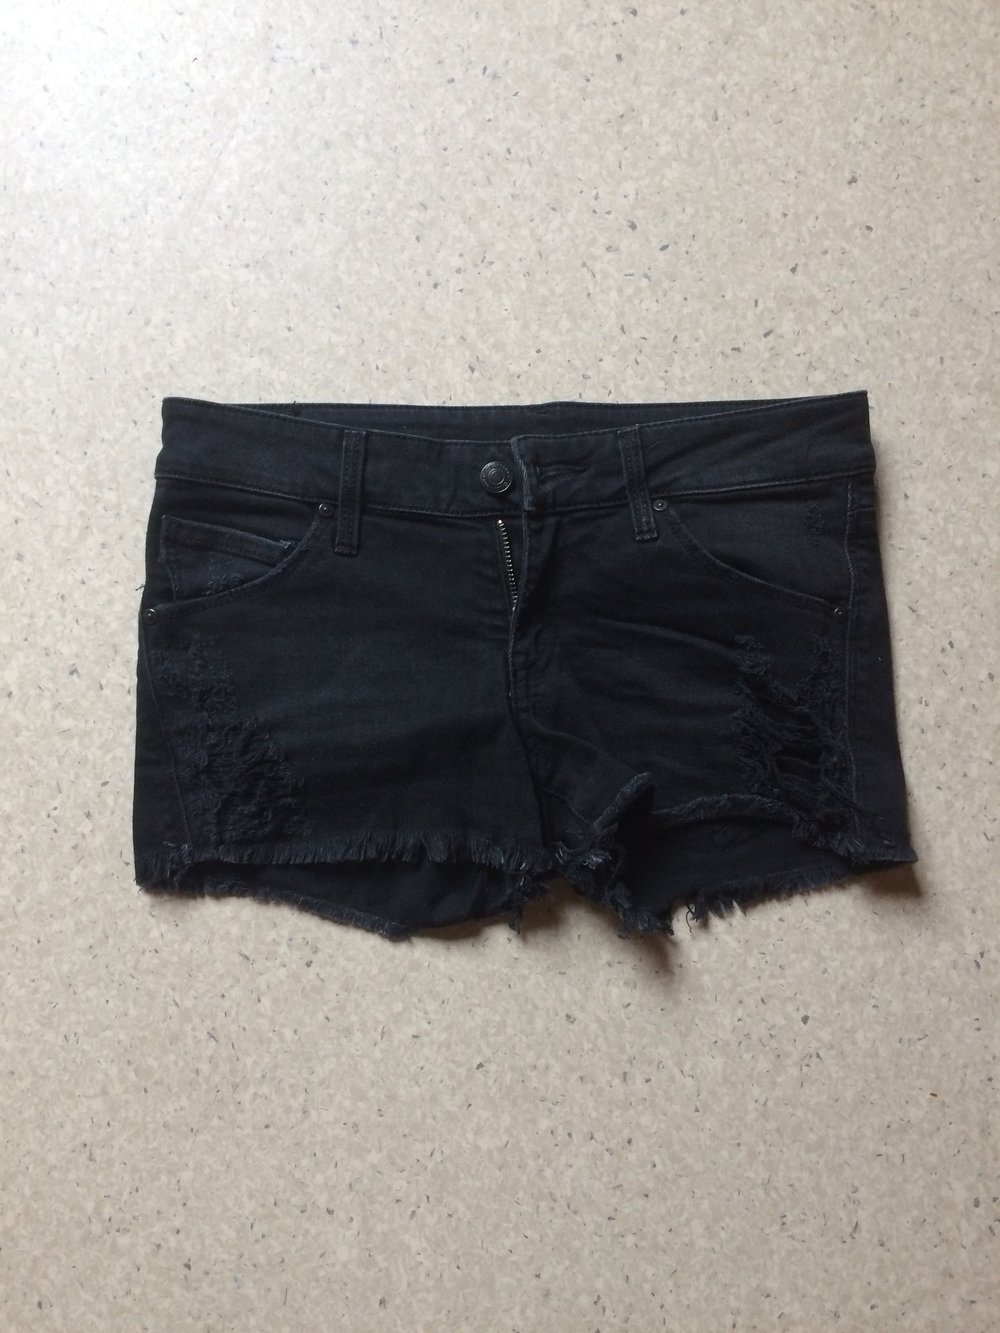 Jeans Shorts Hotpants H&M Destroyed Used look